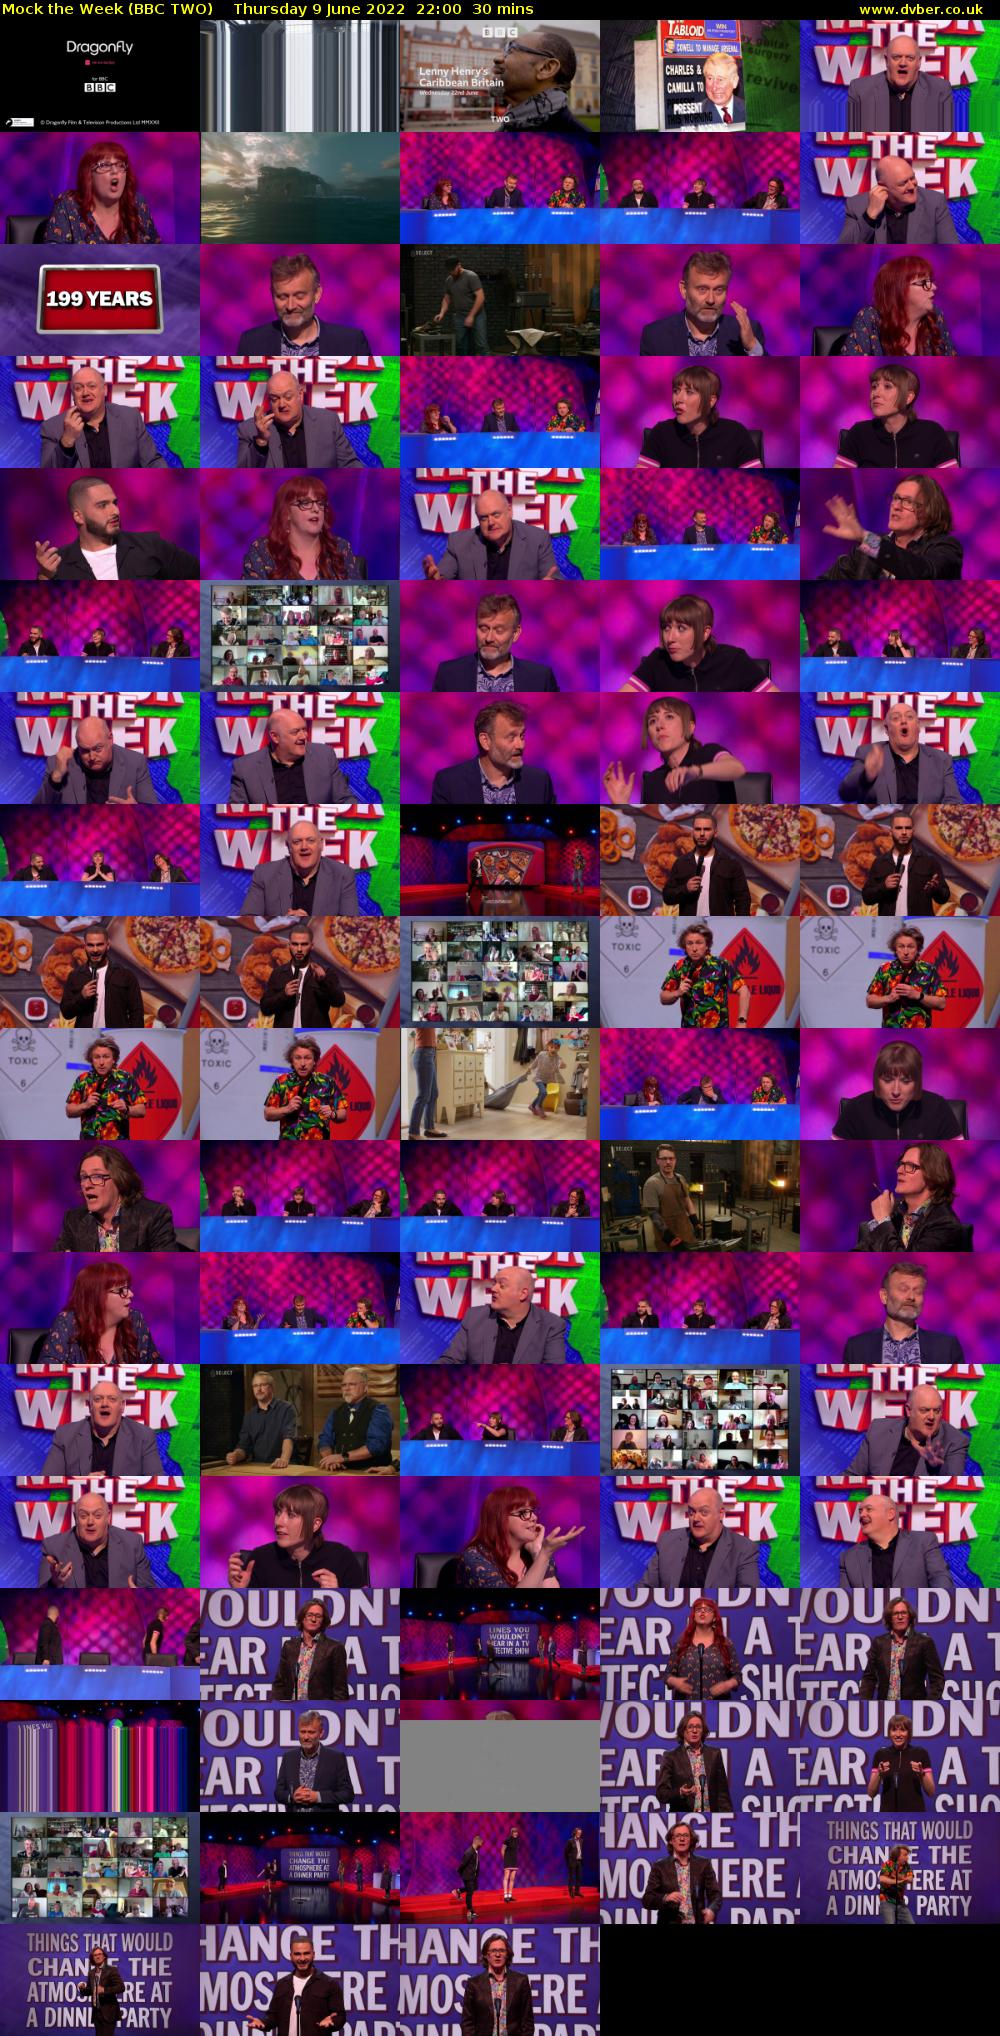 Mock the Week (BBC TWO) Thursday 9 June 2022 22:00 - 22:30